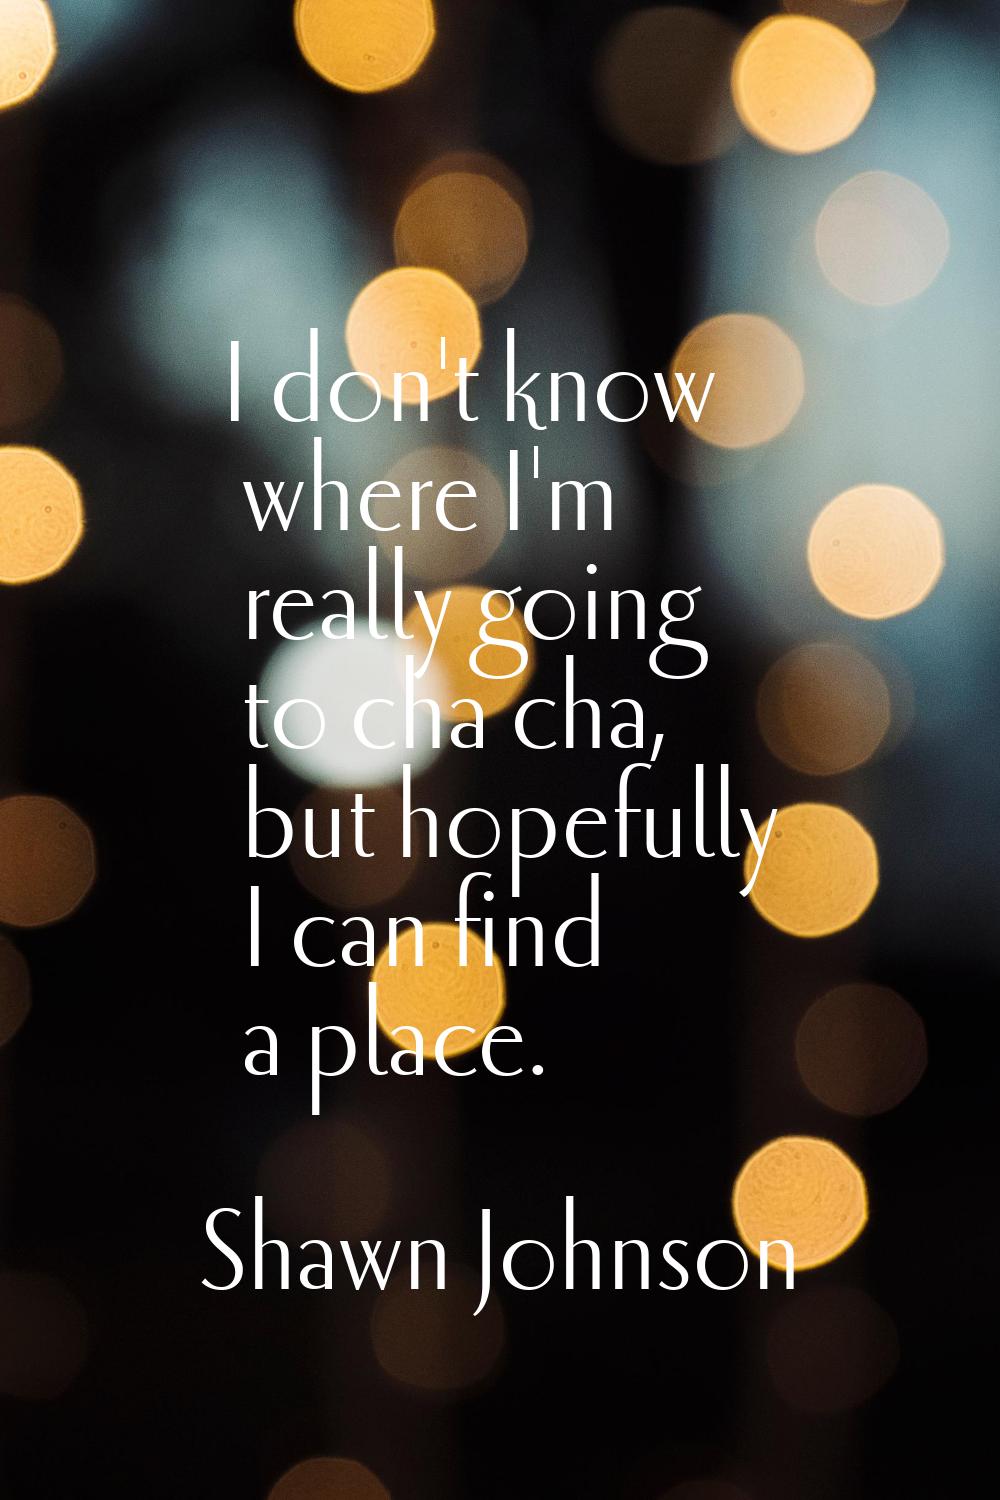 I don't know where I'm really going to cha cha, but hopefully I can find a place.